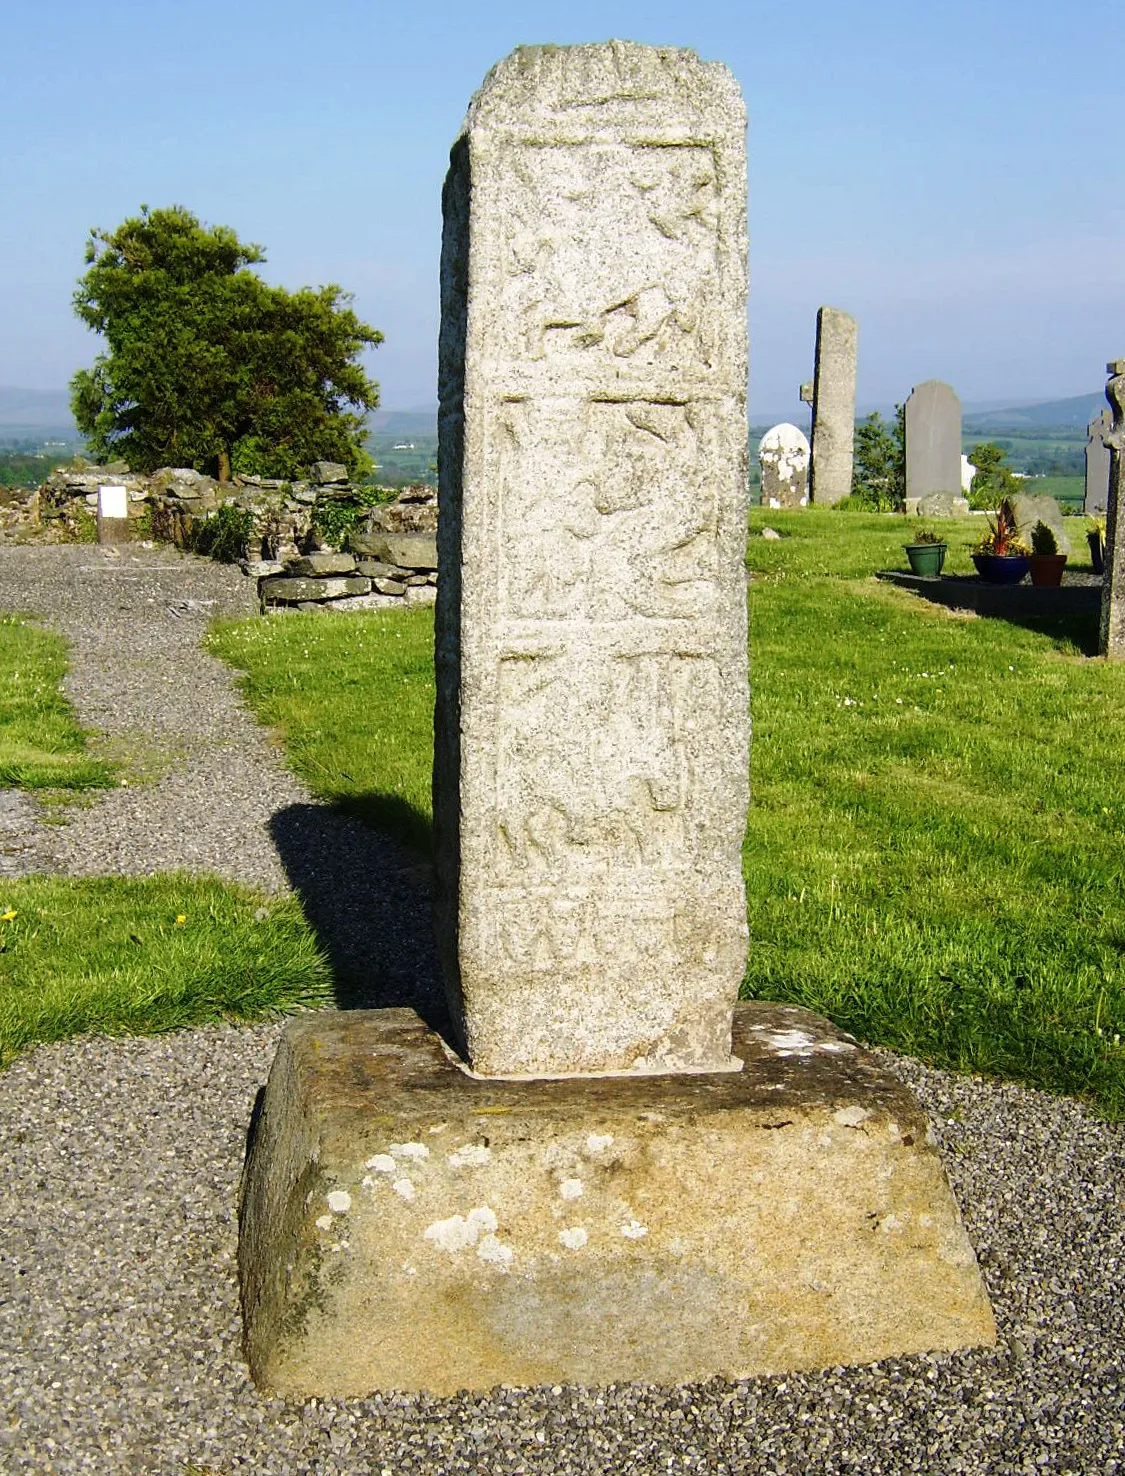 Photo showing: High Cross, western face, the former monastic settlement and walled town of Old Kilcullen, Co. Kildare, Ireland